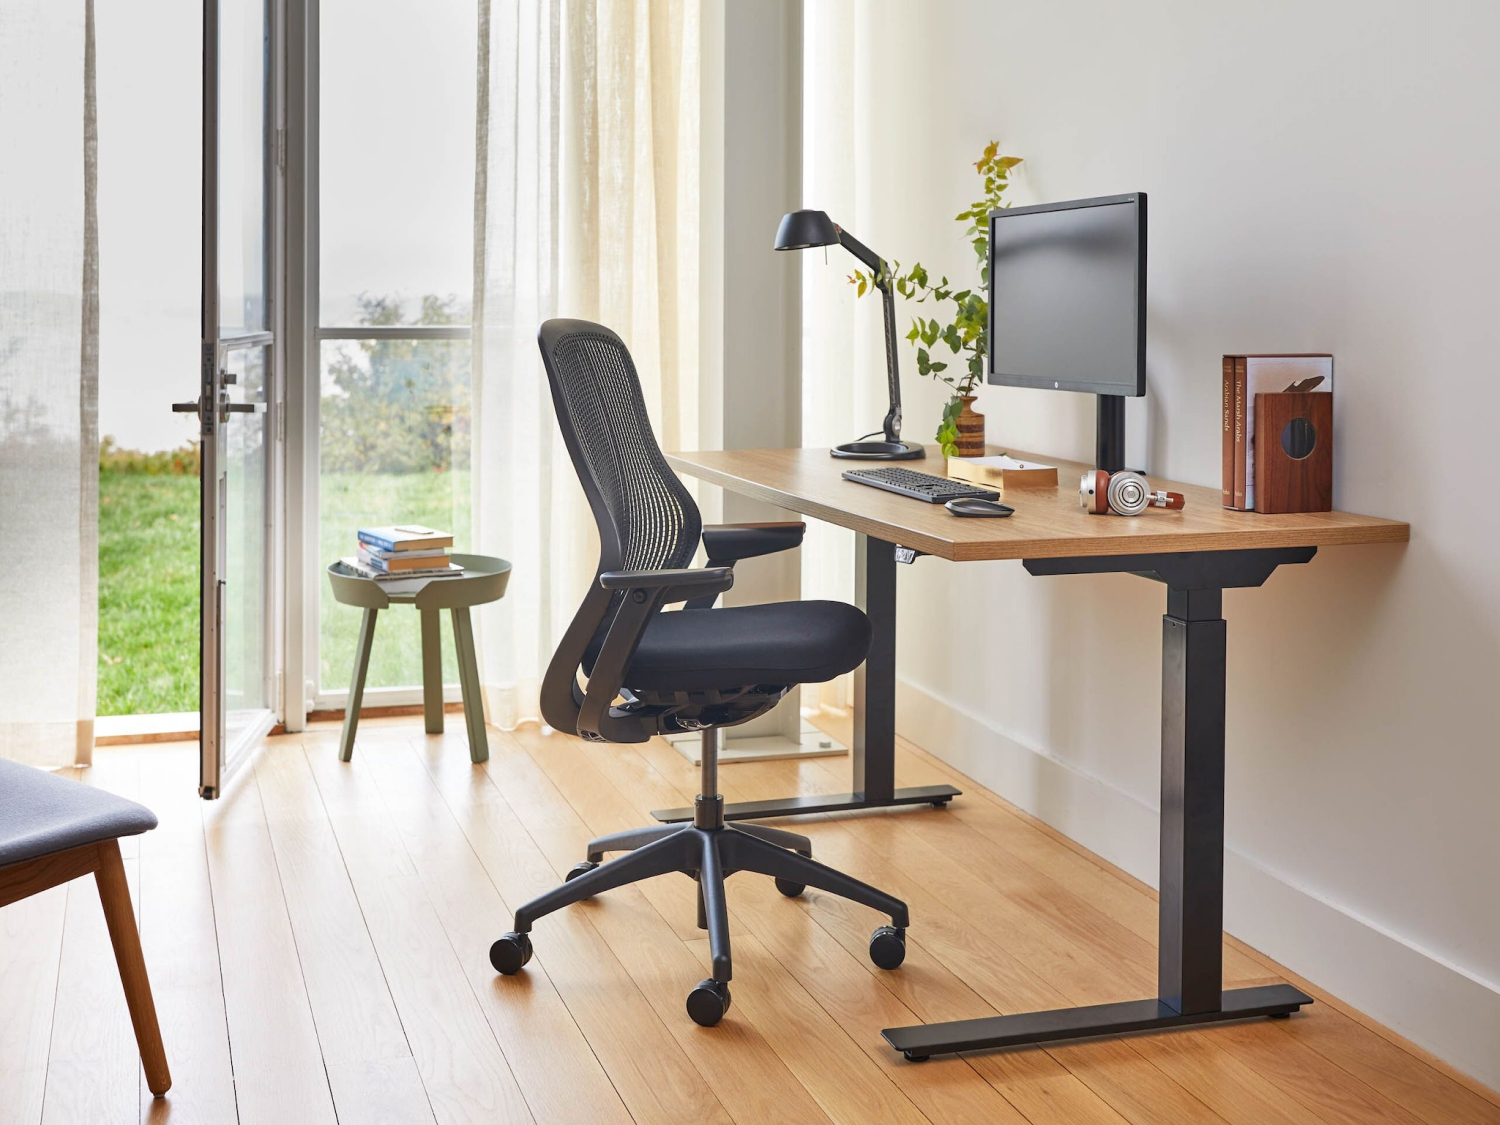 ReGeneration Chair and Hipso Height Adjustable Desk